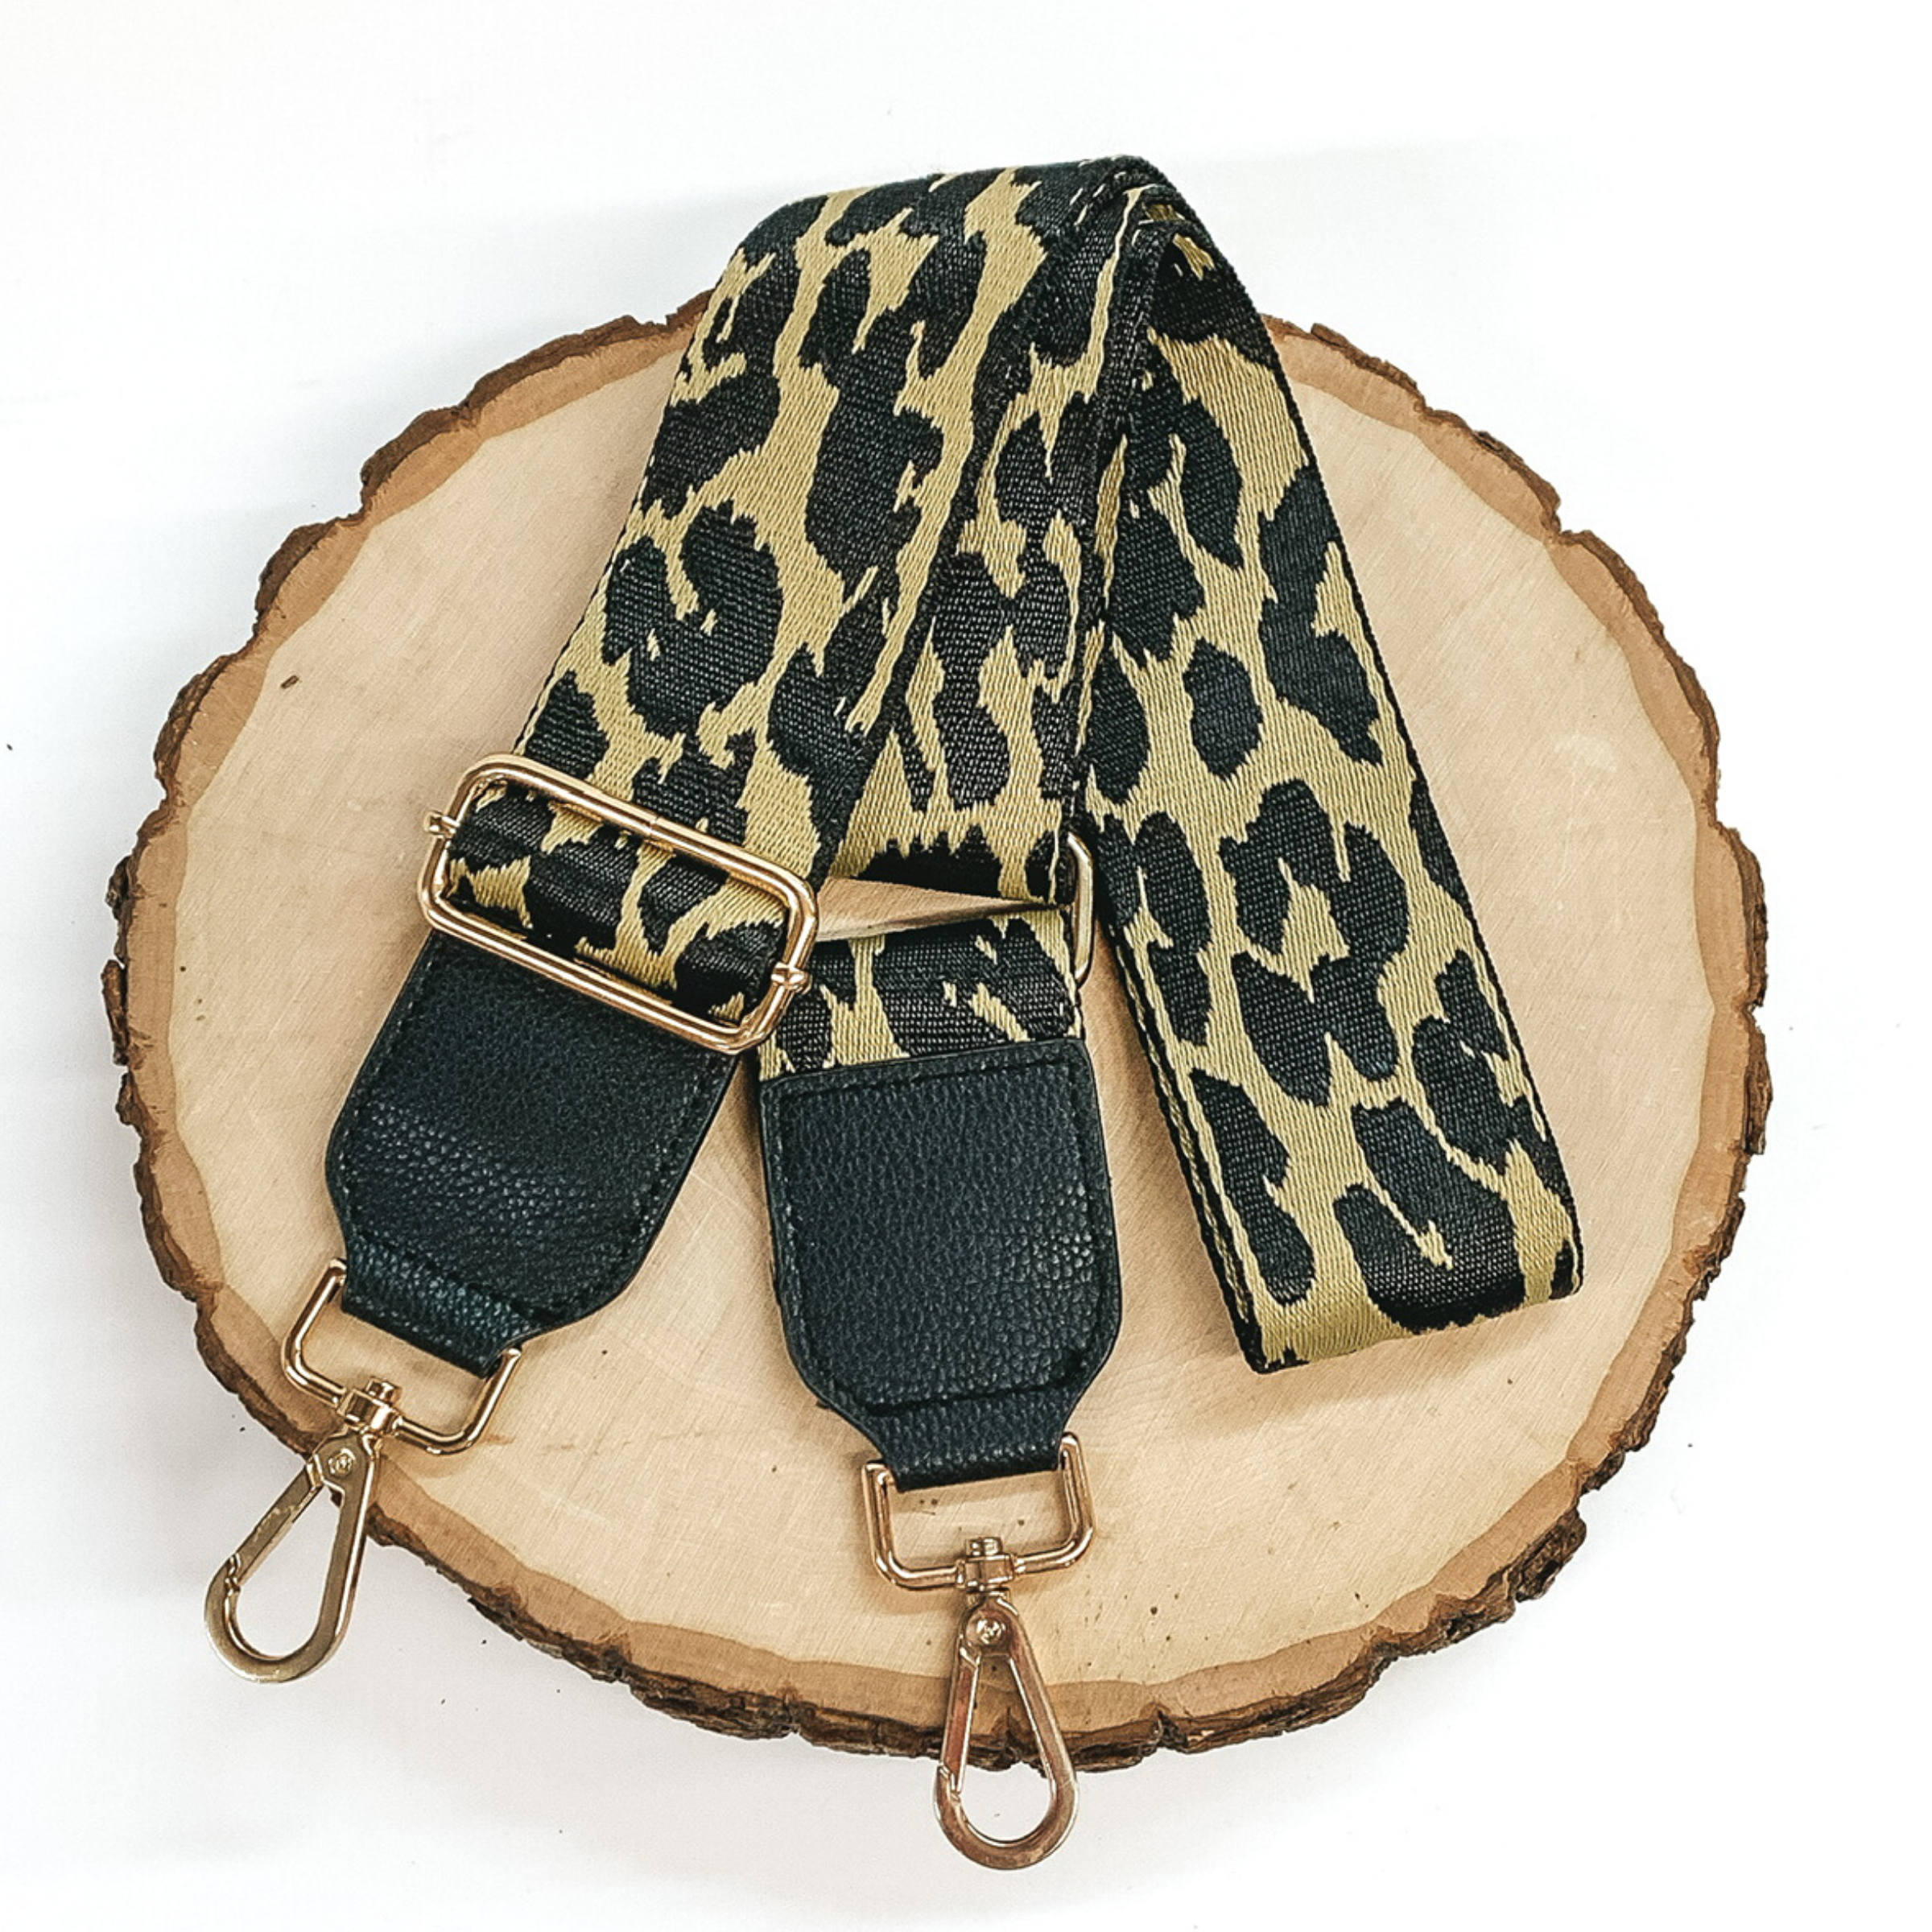 Gold purse strap with a black leopard print. This purse strap includes gold accents and black pieces at each end. This purse strap is pictured on a piece of wood on a white background. 